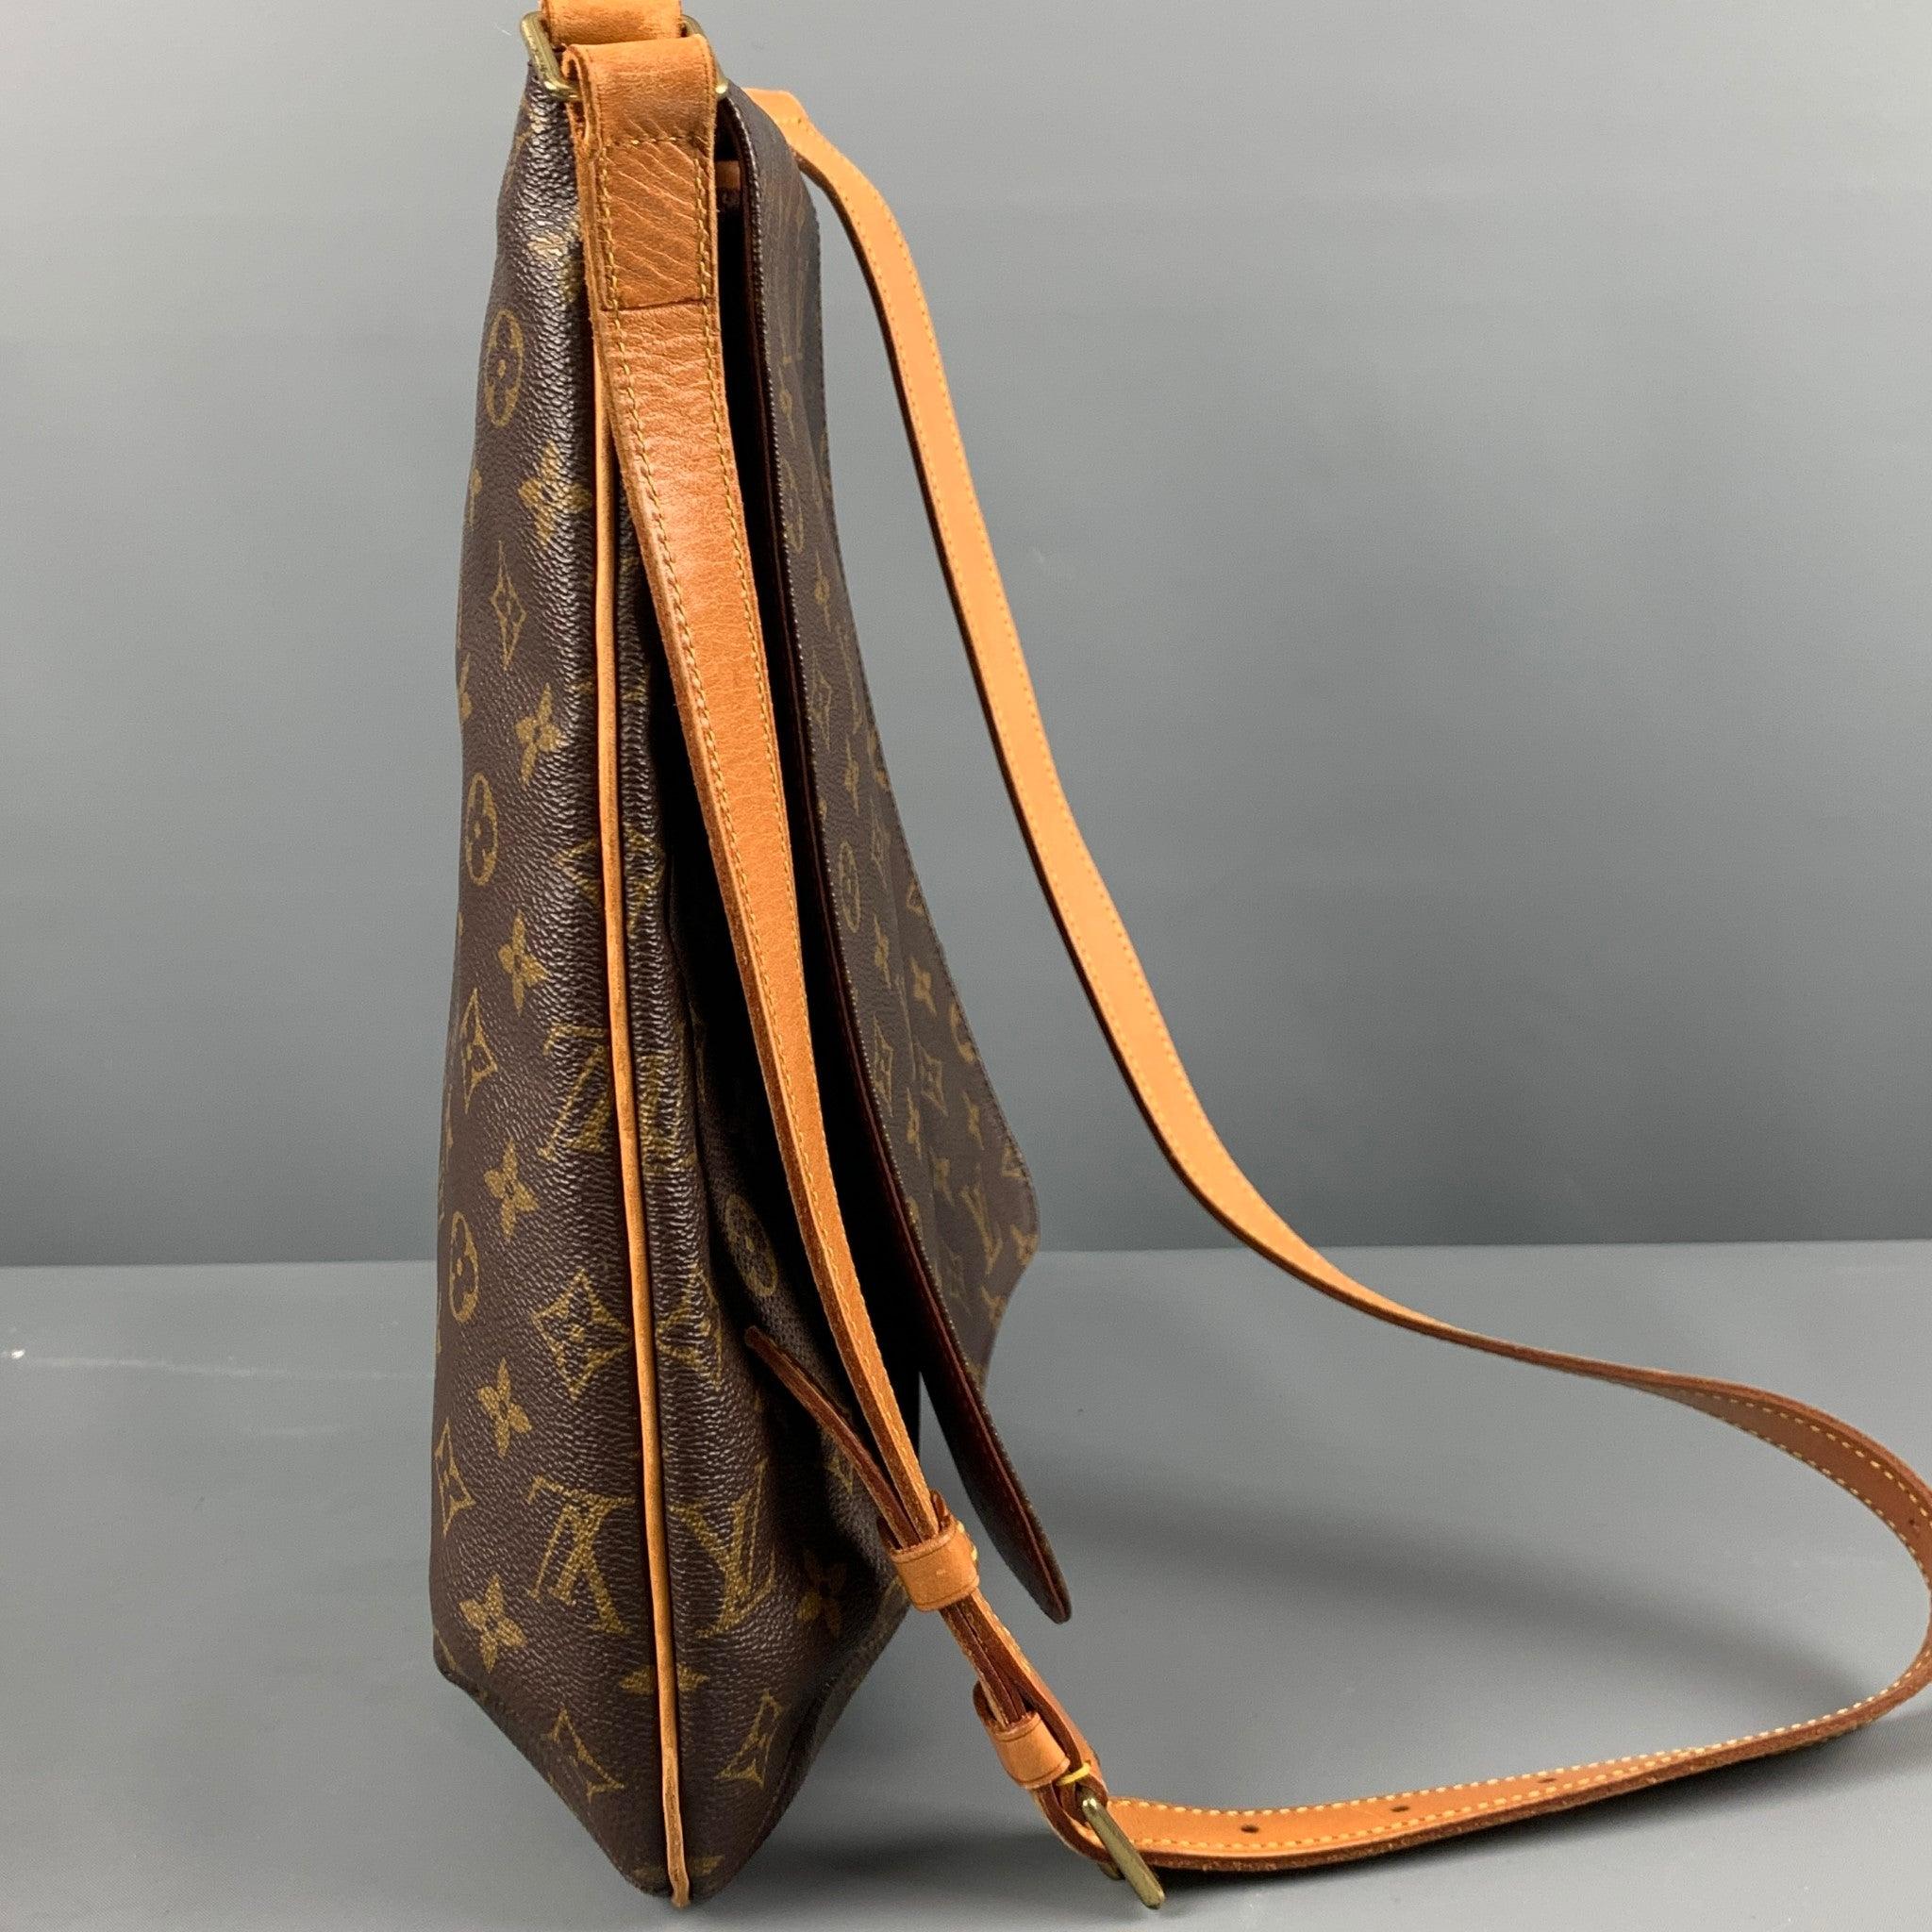 LOUIS VUITTON GM MUSETTE SALSA bag comes in a brown and beige monogram coated canvas featuring a messenger style, adjustable crossbody strap, gold tone hardware, and inner pocket. Made in France. Very Good Pre-Owned Condition. Lights signs of wear.